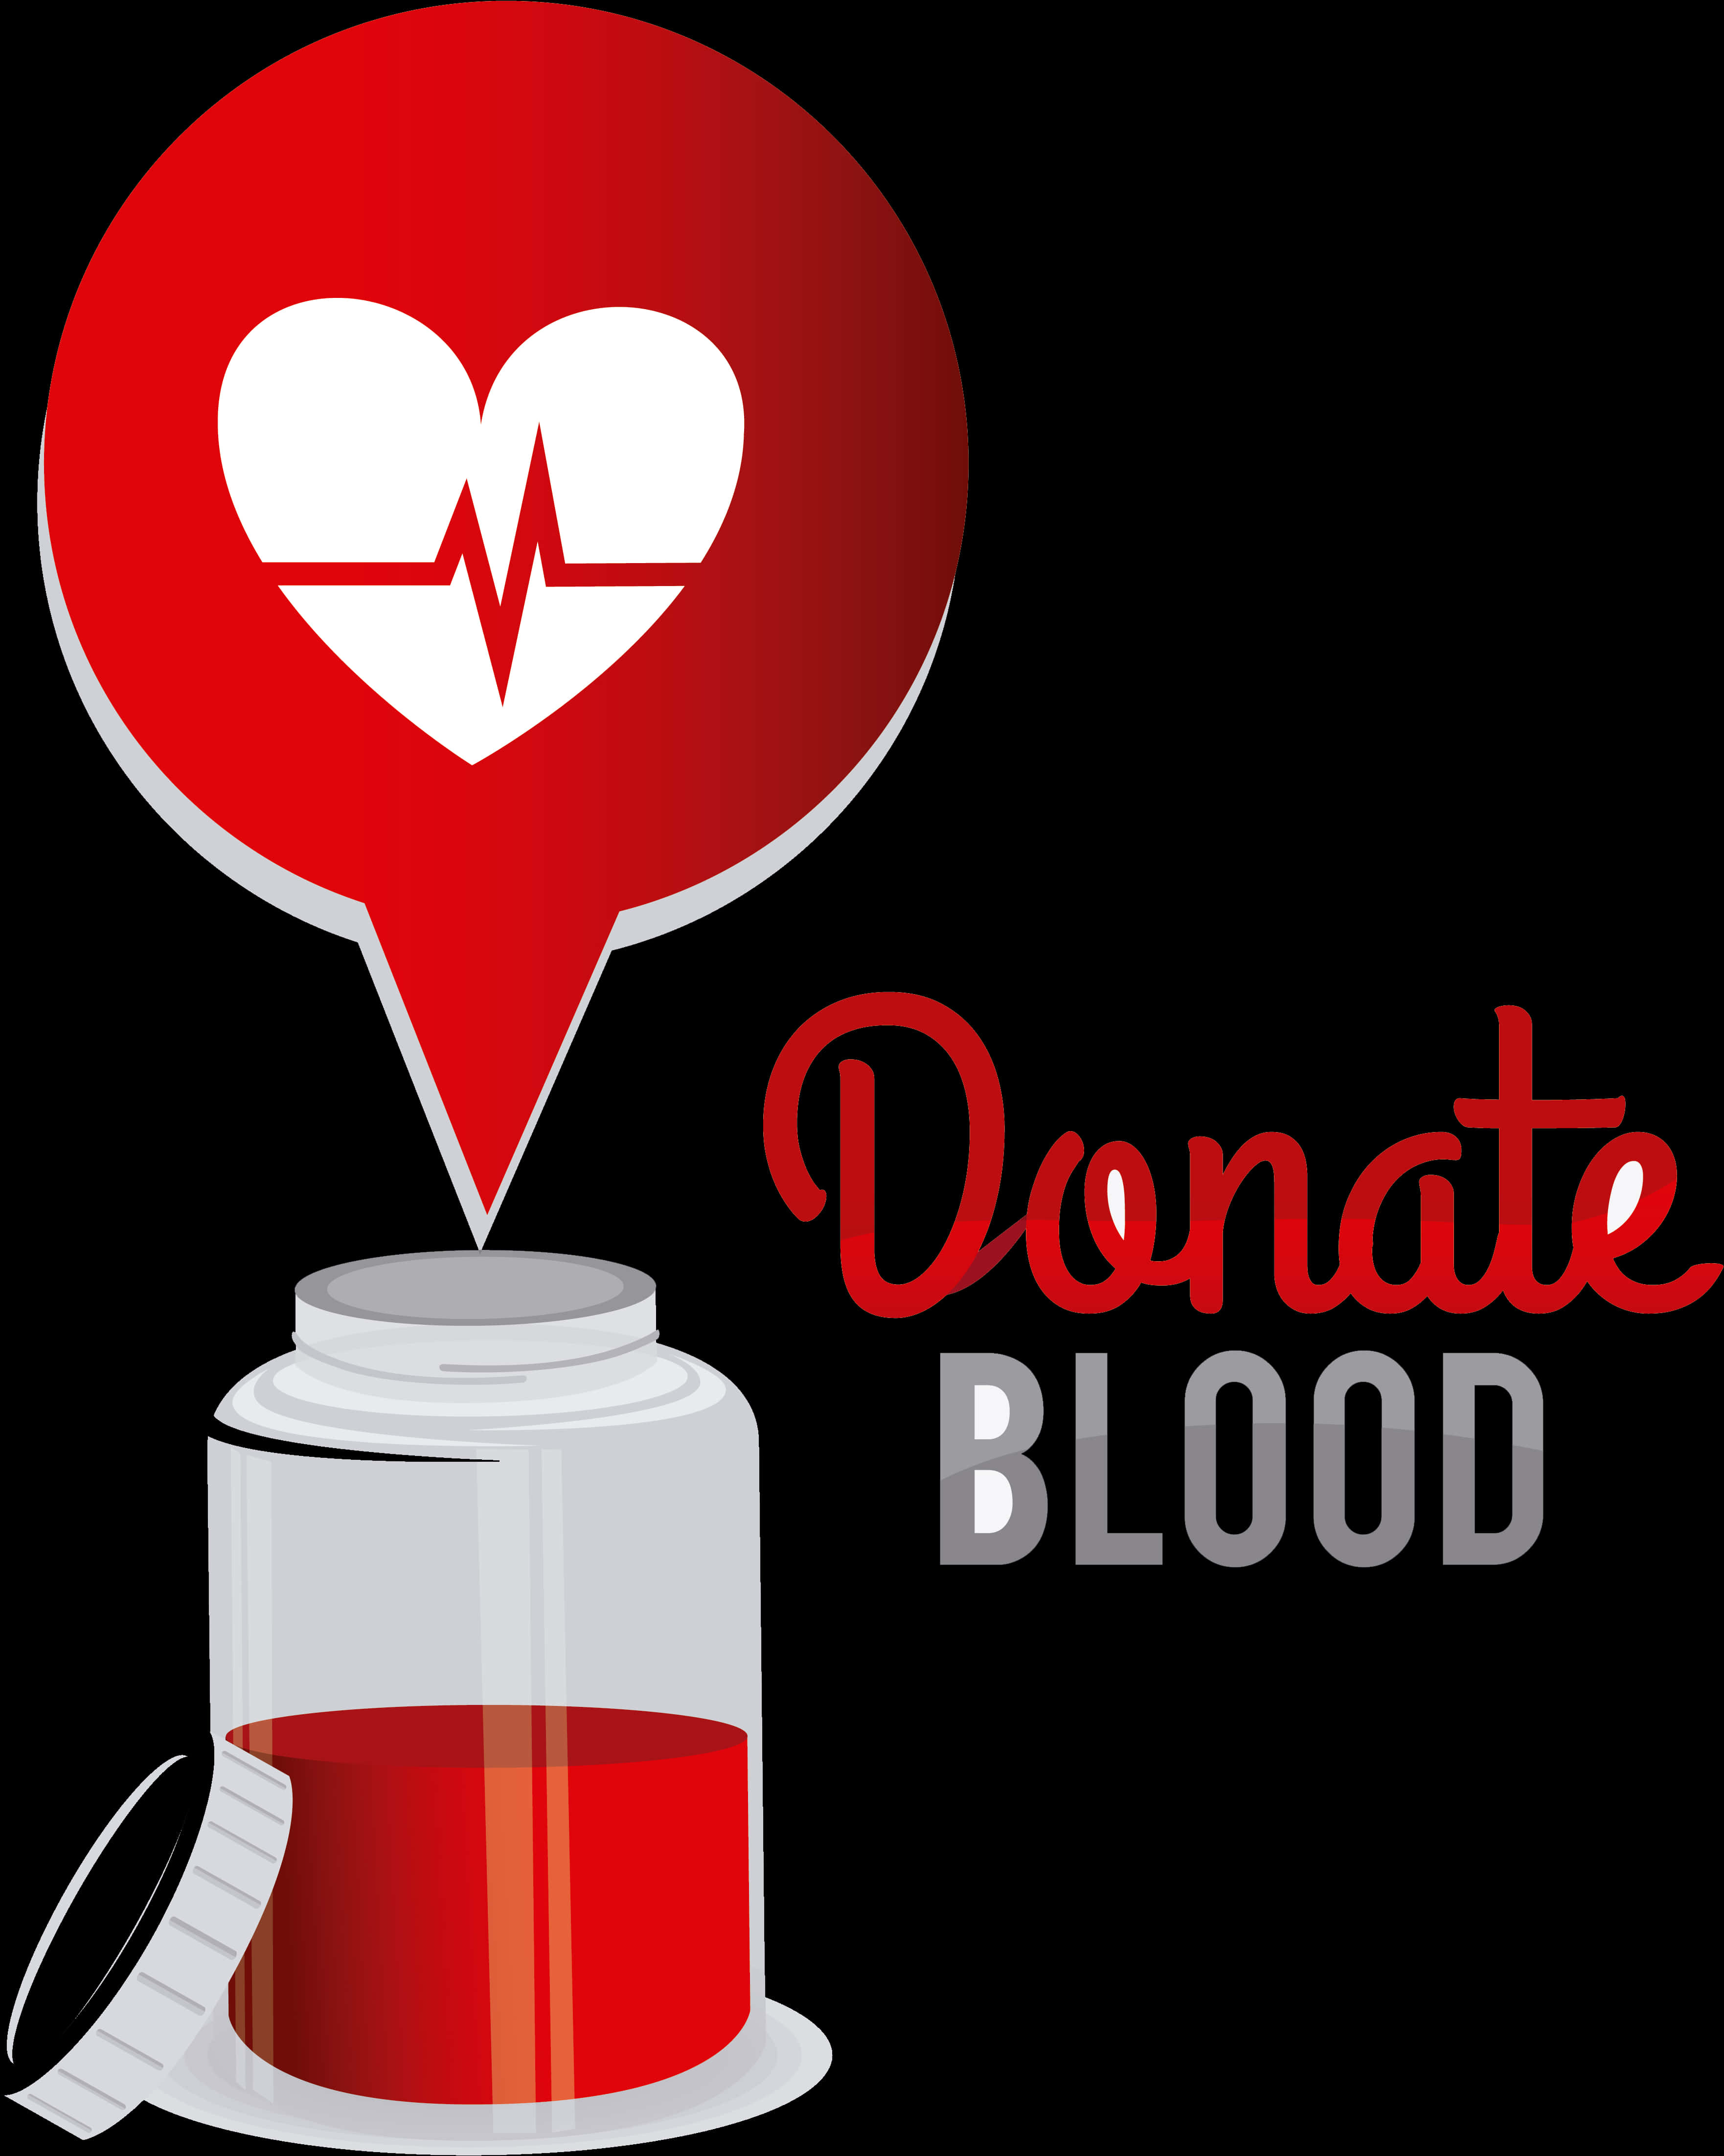 Blood Donation Heartbeat Graphic PNG